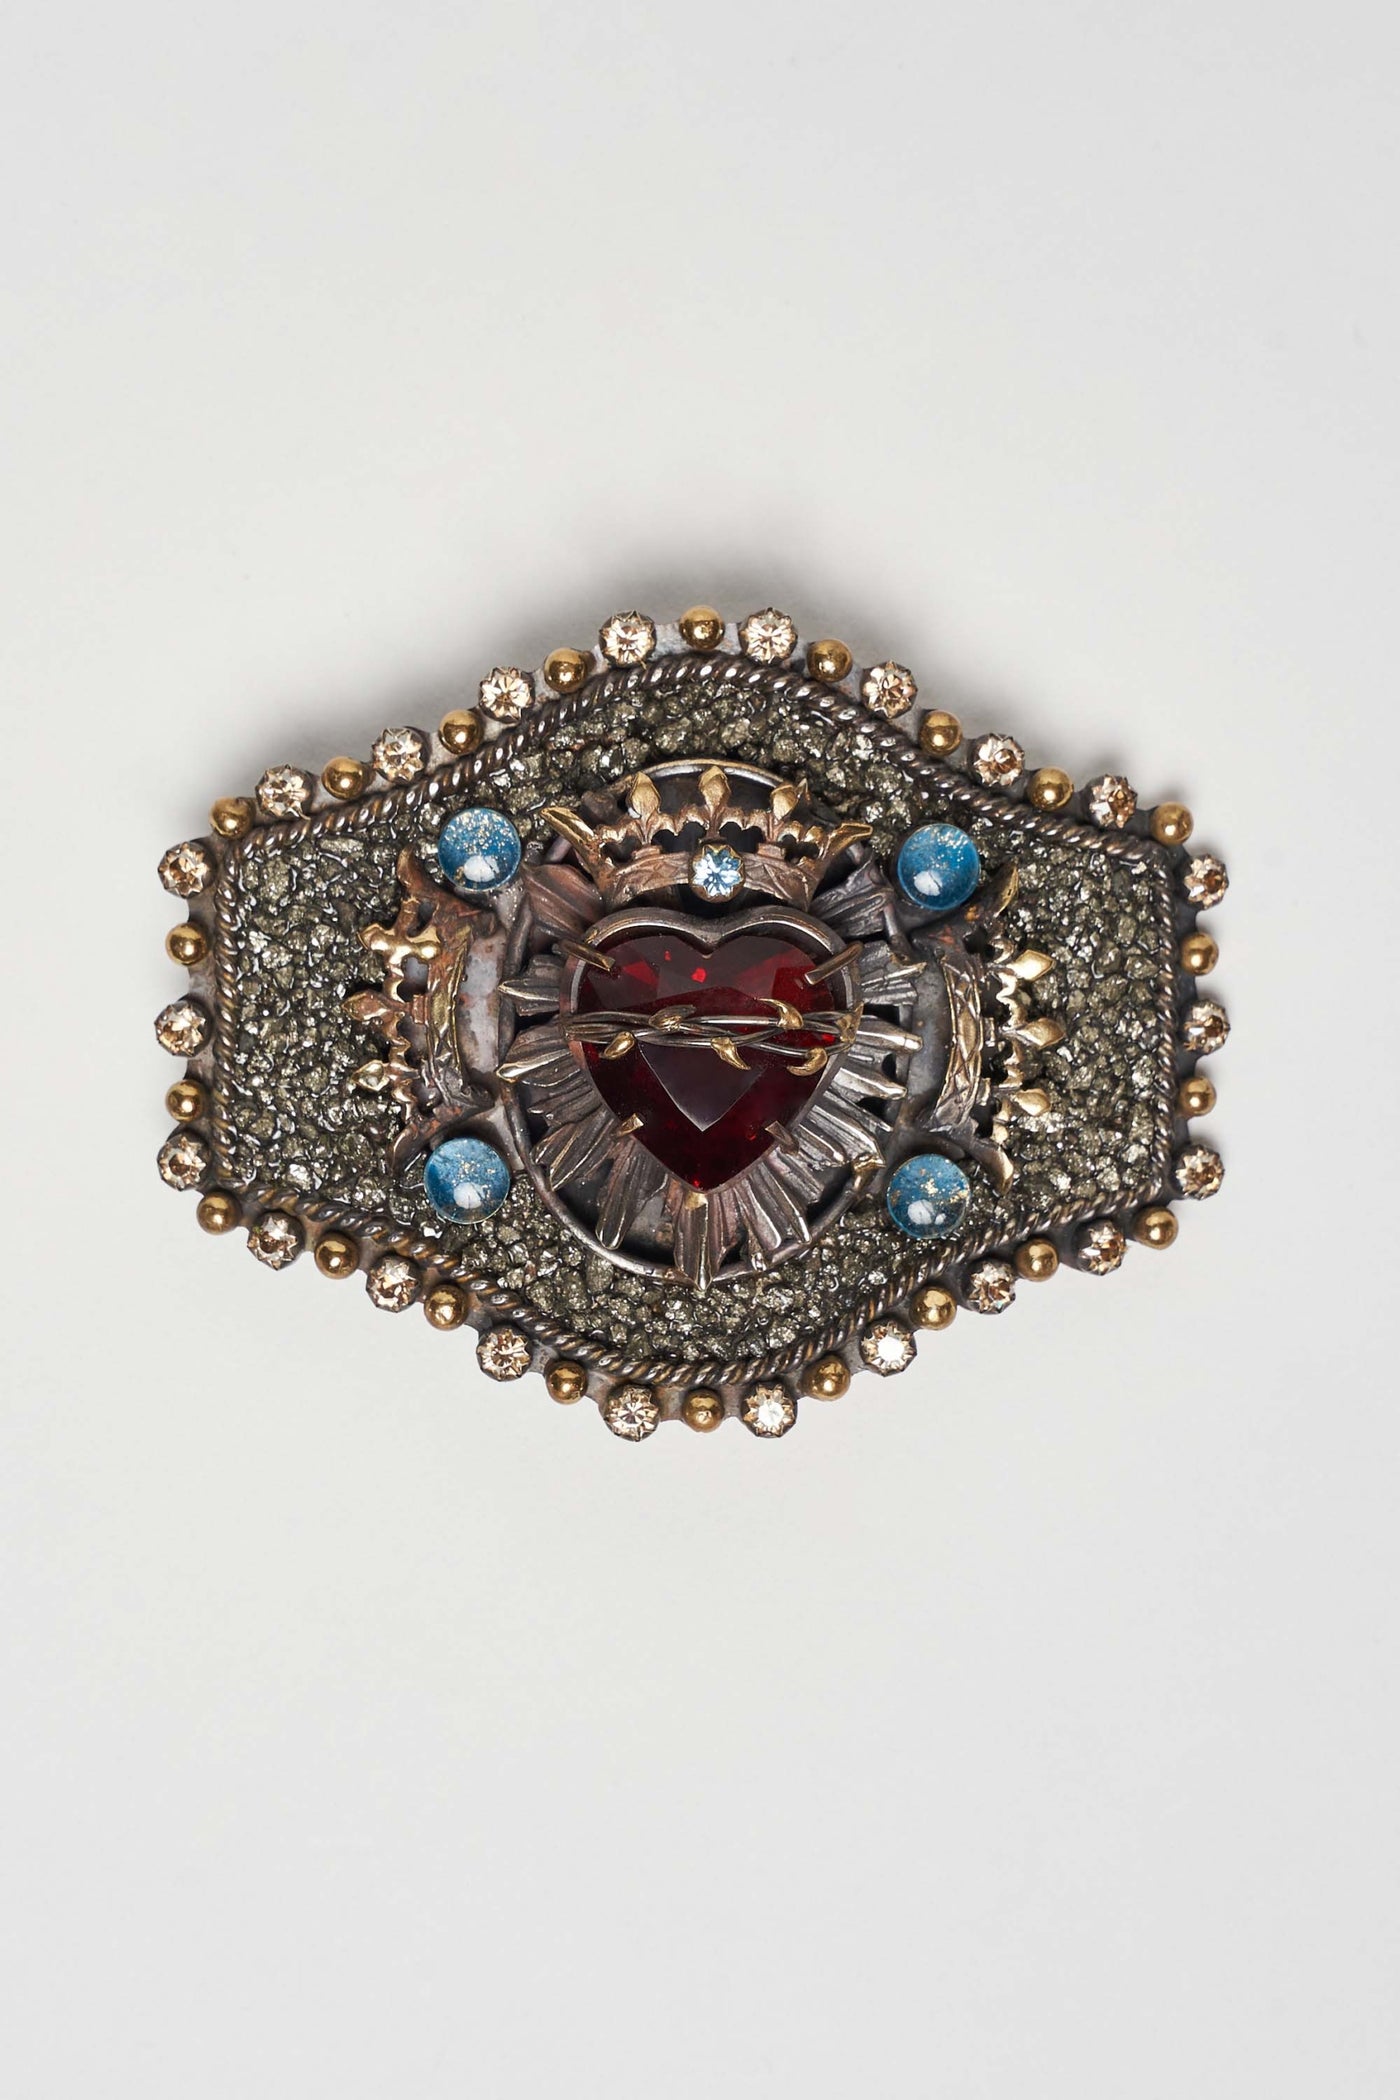 CORAZON SAGRADO BUCKLE WITH CROWN, CRYSTALS AND FACETED GLASS